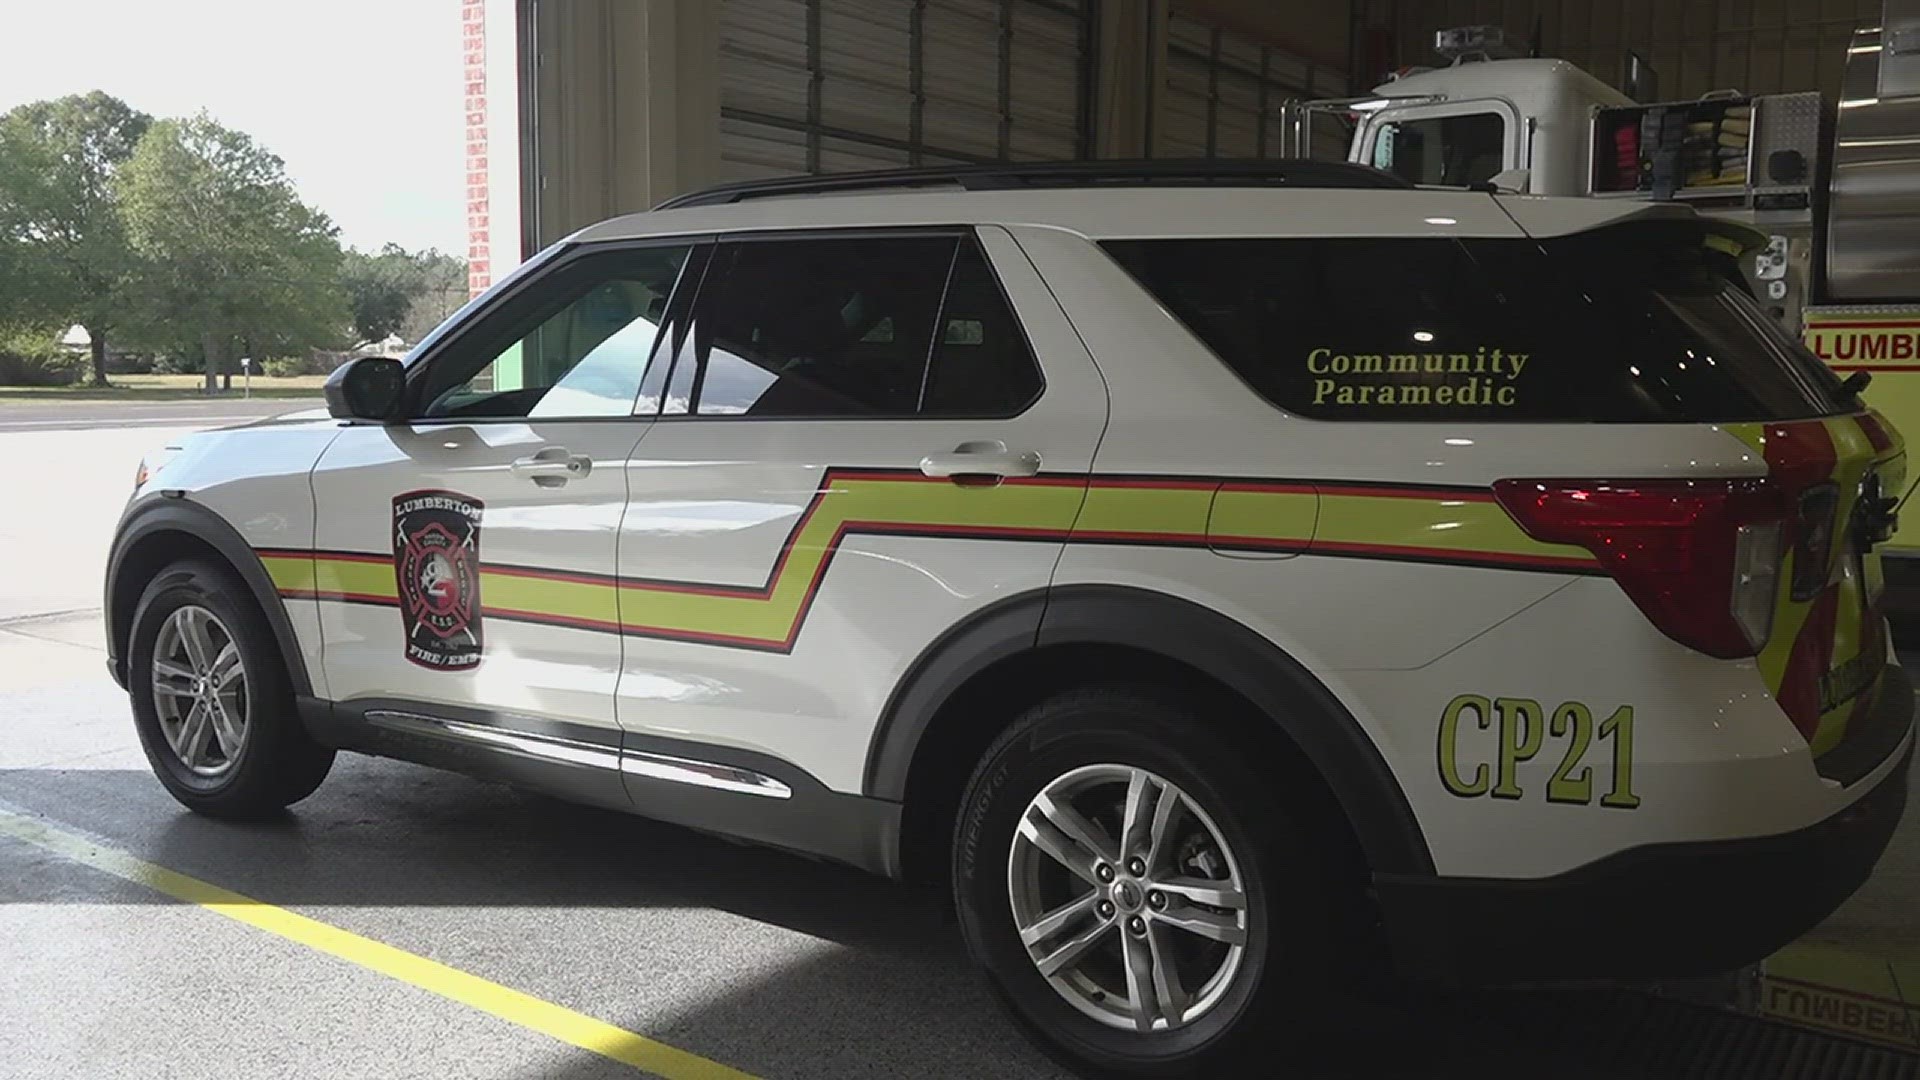 Mobile Integrated Healthcare is a new partnership between Hardin County ESD 2 and Lumberton Fire and EMS, approved by Hardin County Commissioners.